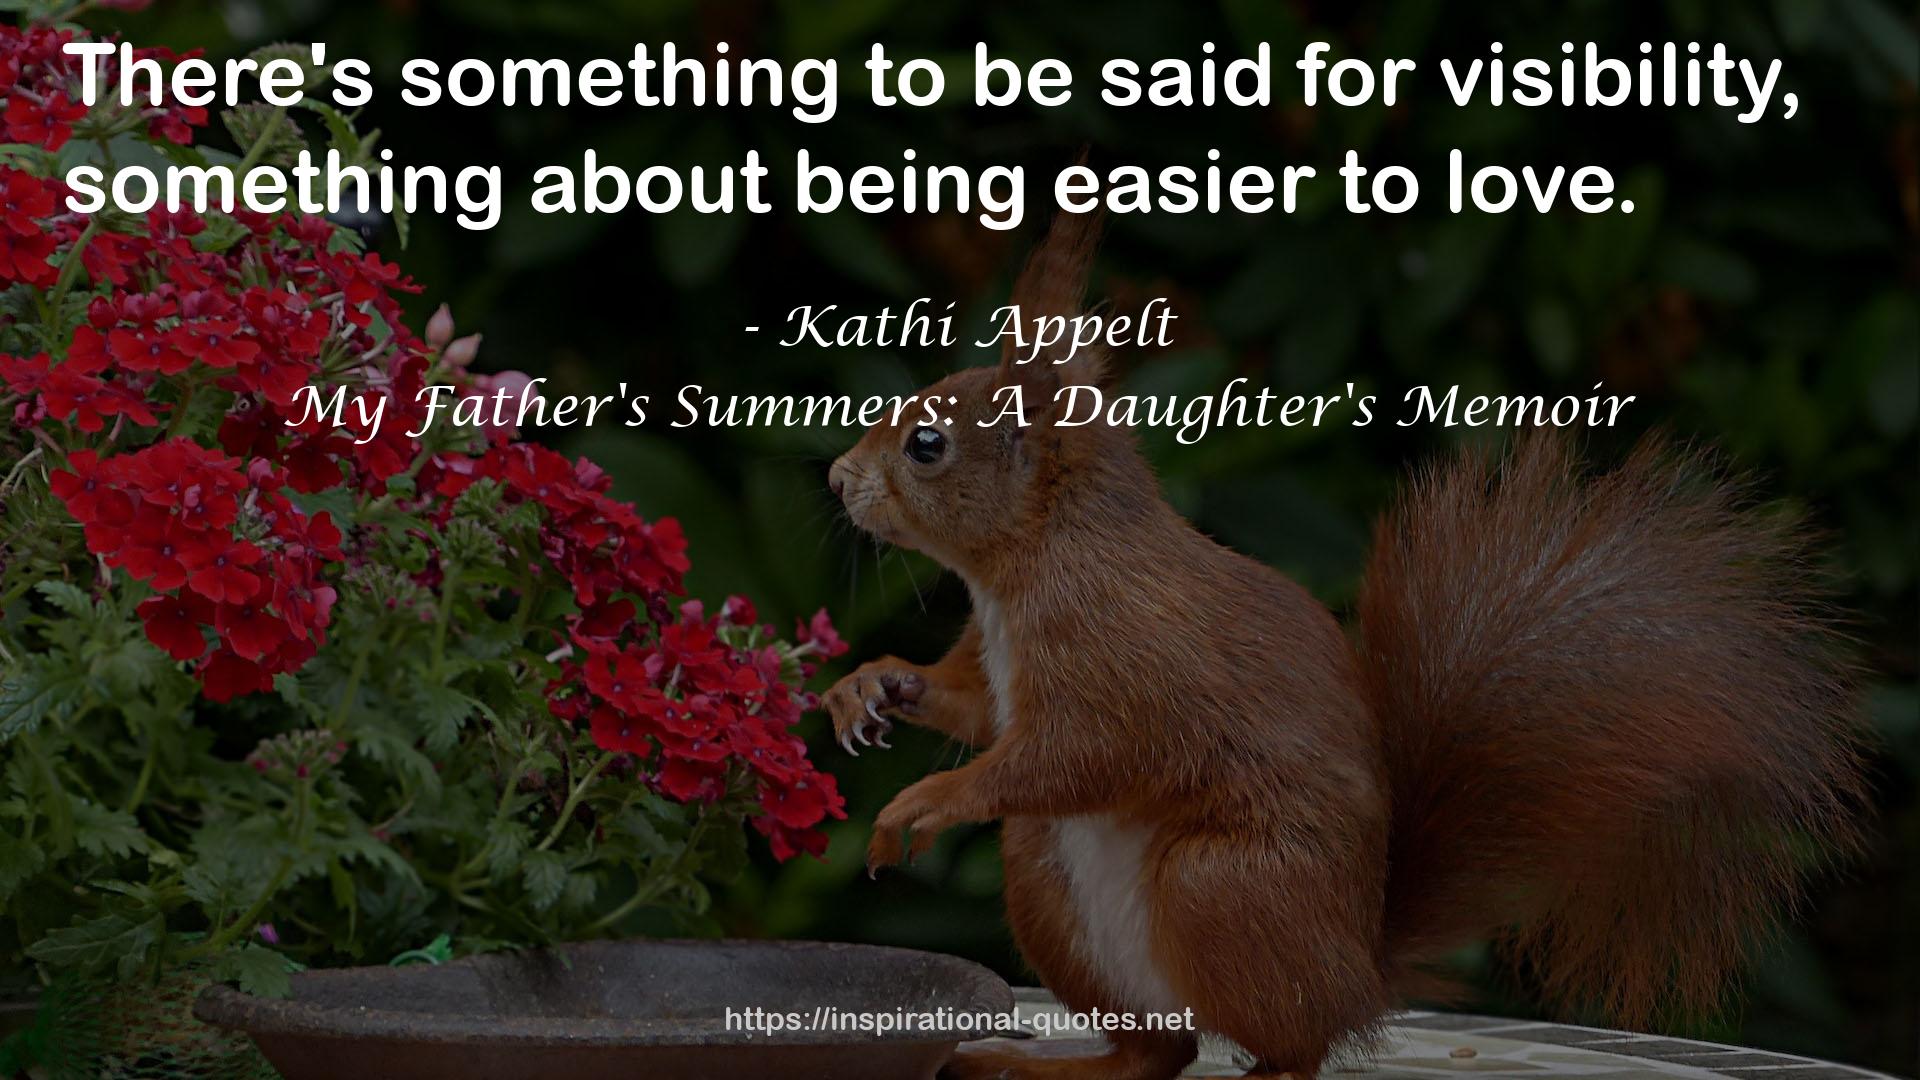 My Father's Summers: A Daughter's Memoir QUOTES